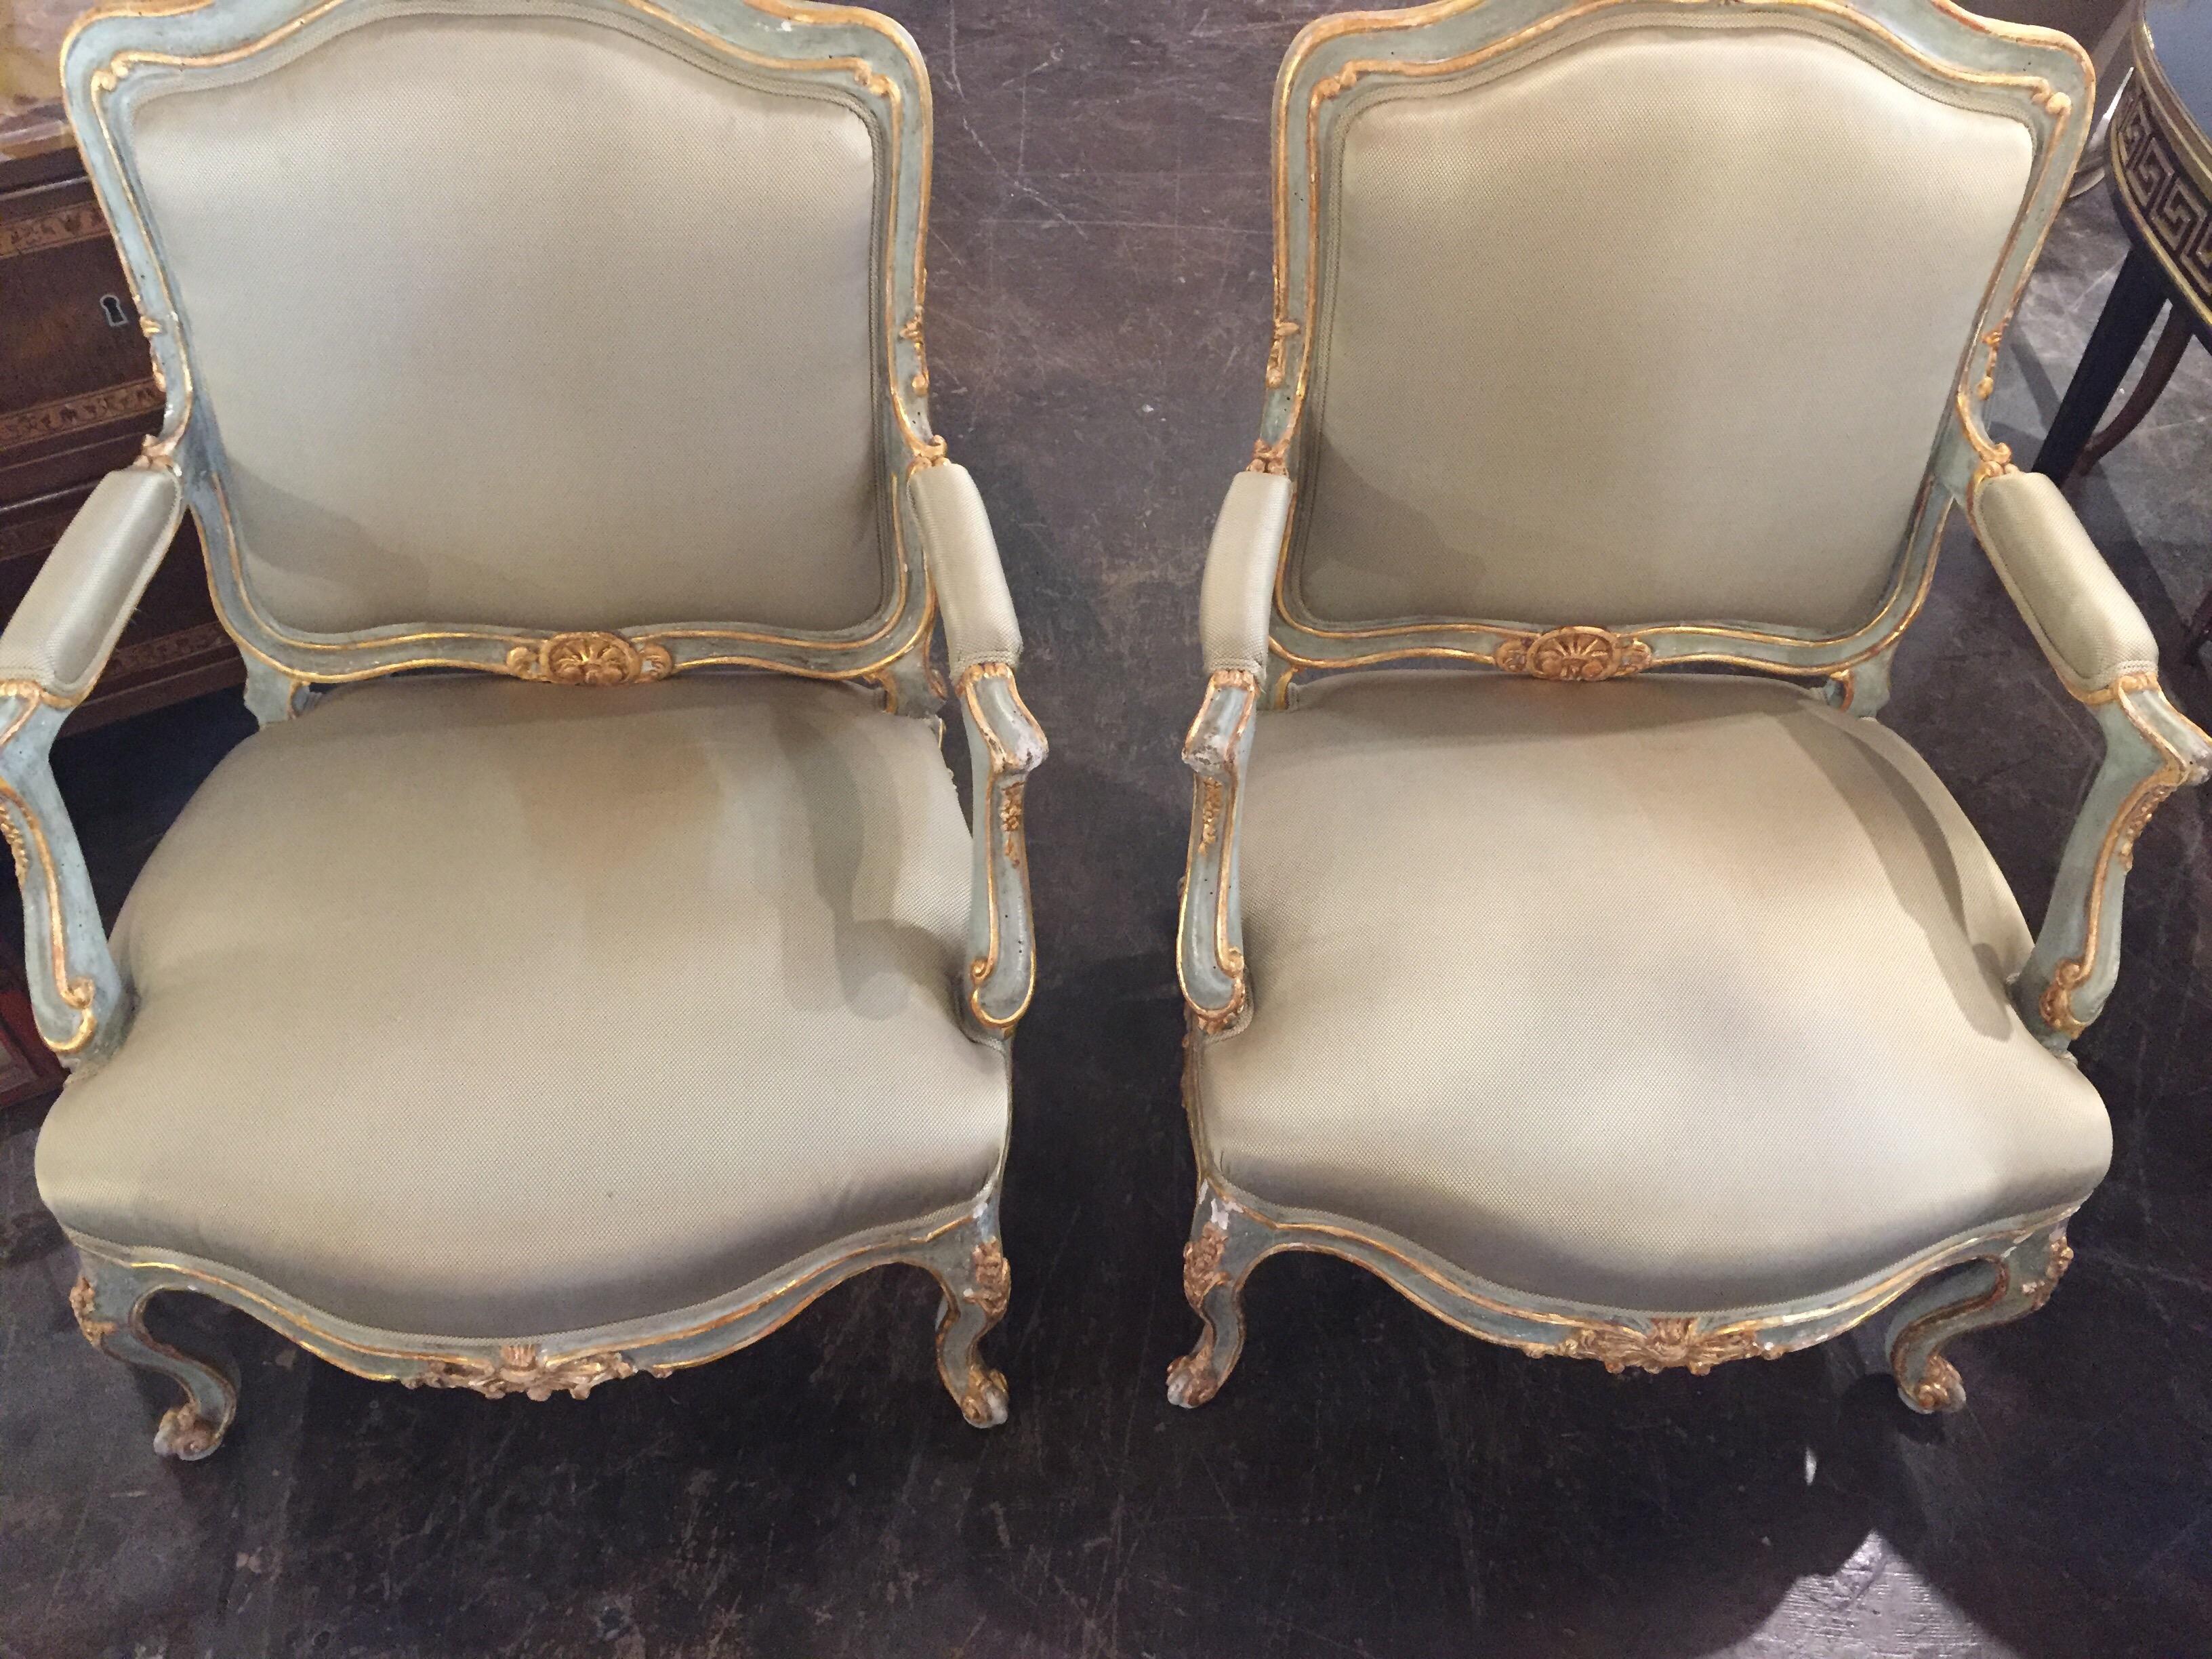 Pair of 18th century Louis XV style armchairs, circa 1780. Beautiful original partial gilt finish and recently upholstered in sage green silk. A Classic example of Fine 18th century French furniture. Ready to make a statement in a fine home.